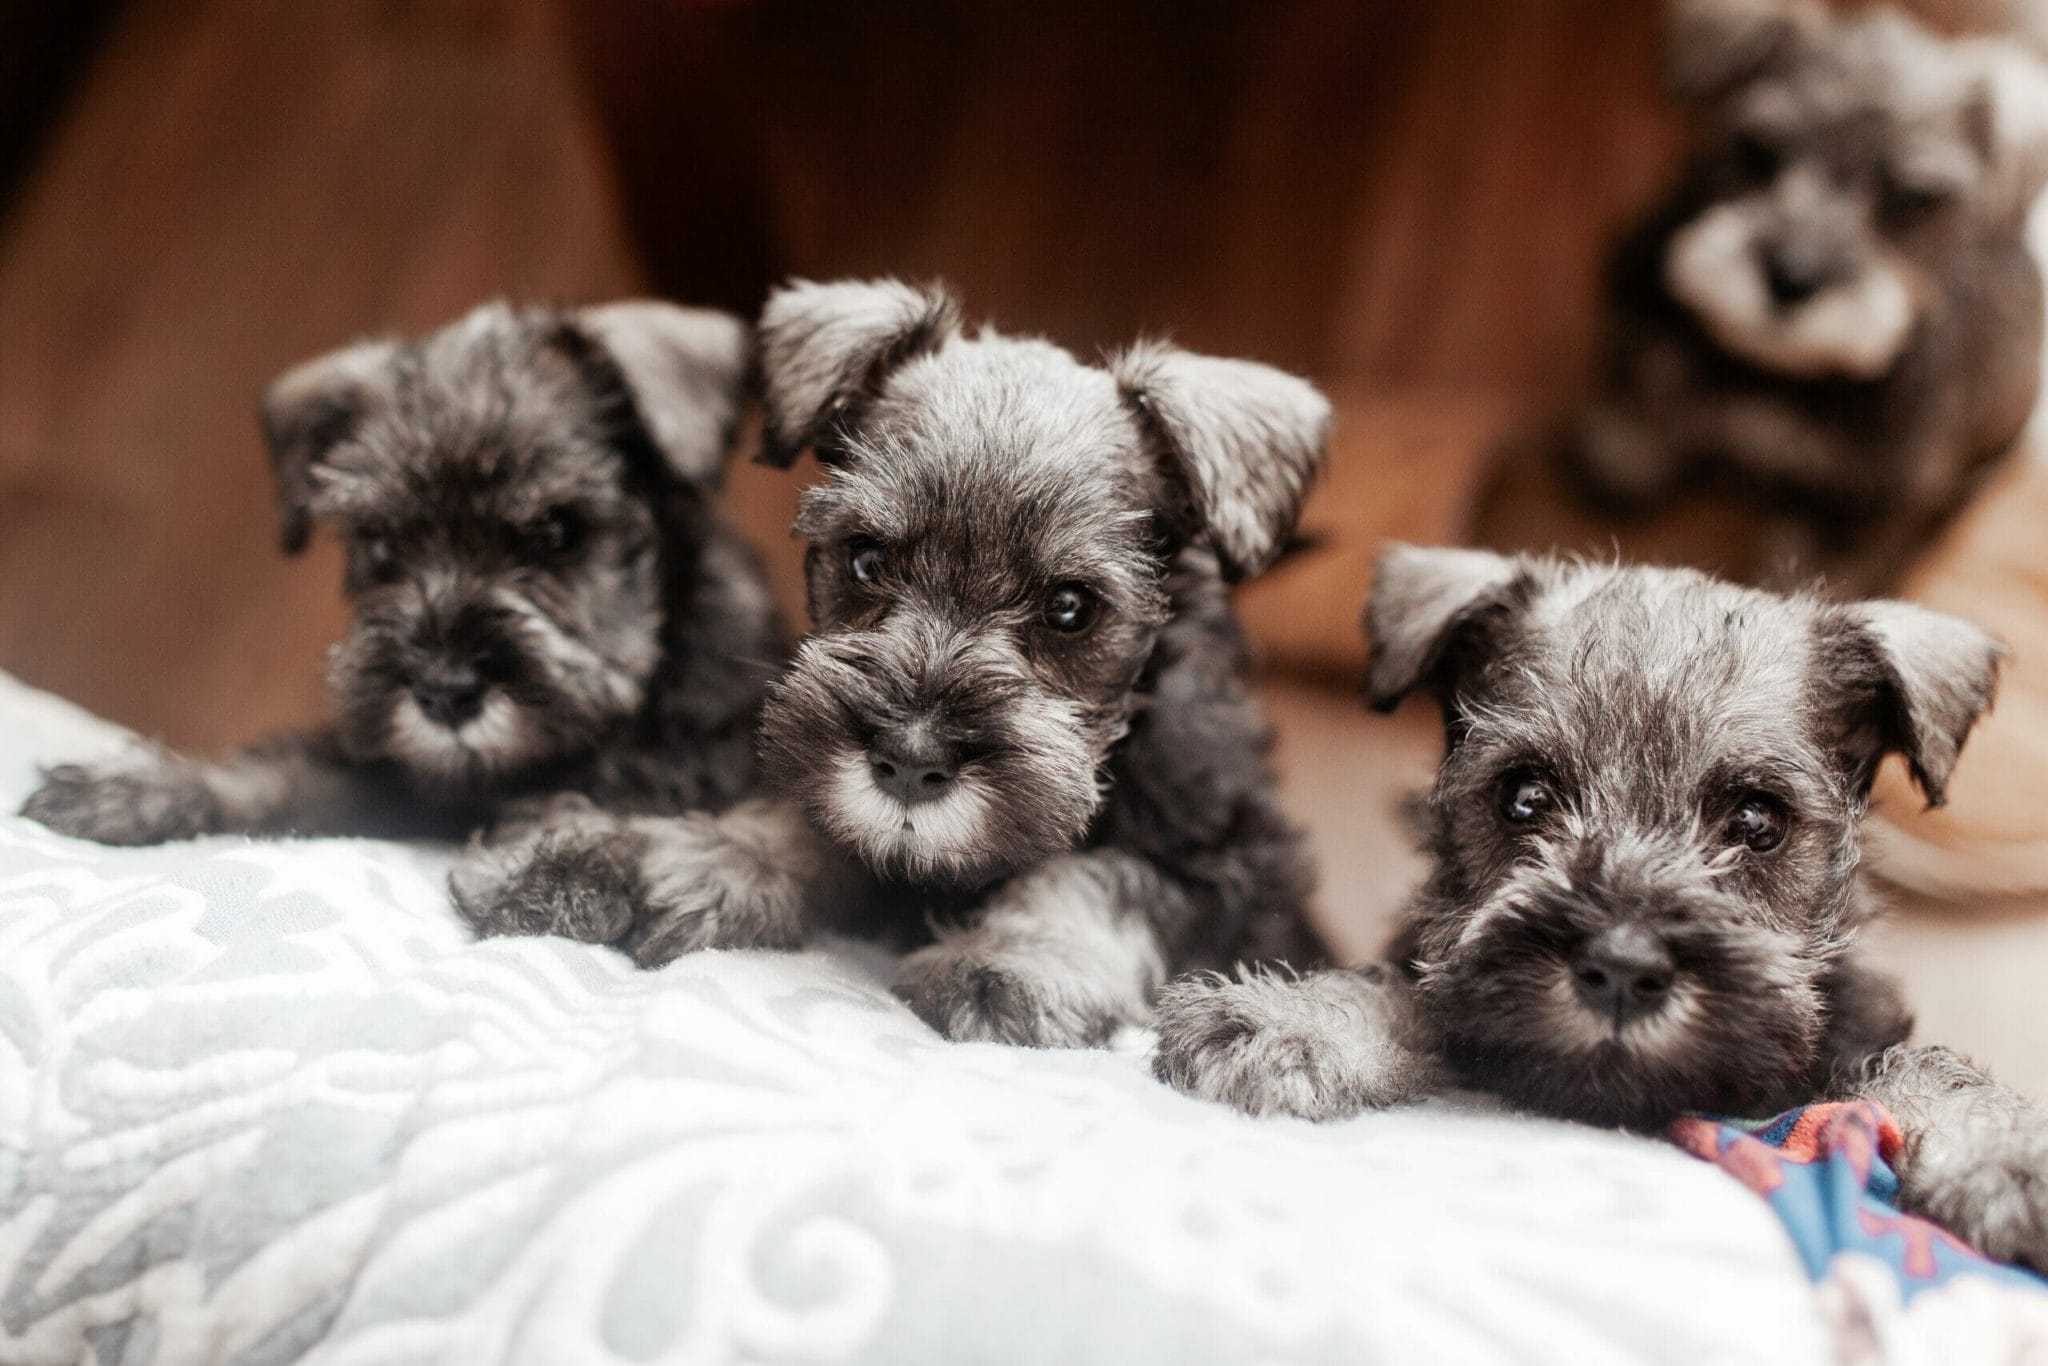 What makes the Toy Schnauzer so appealing?